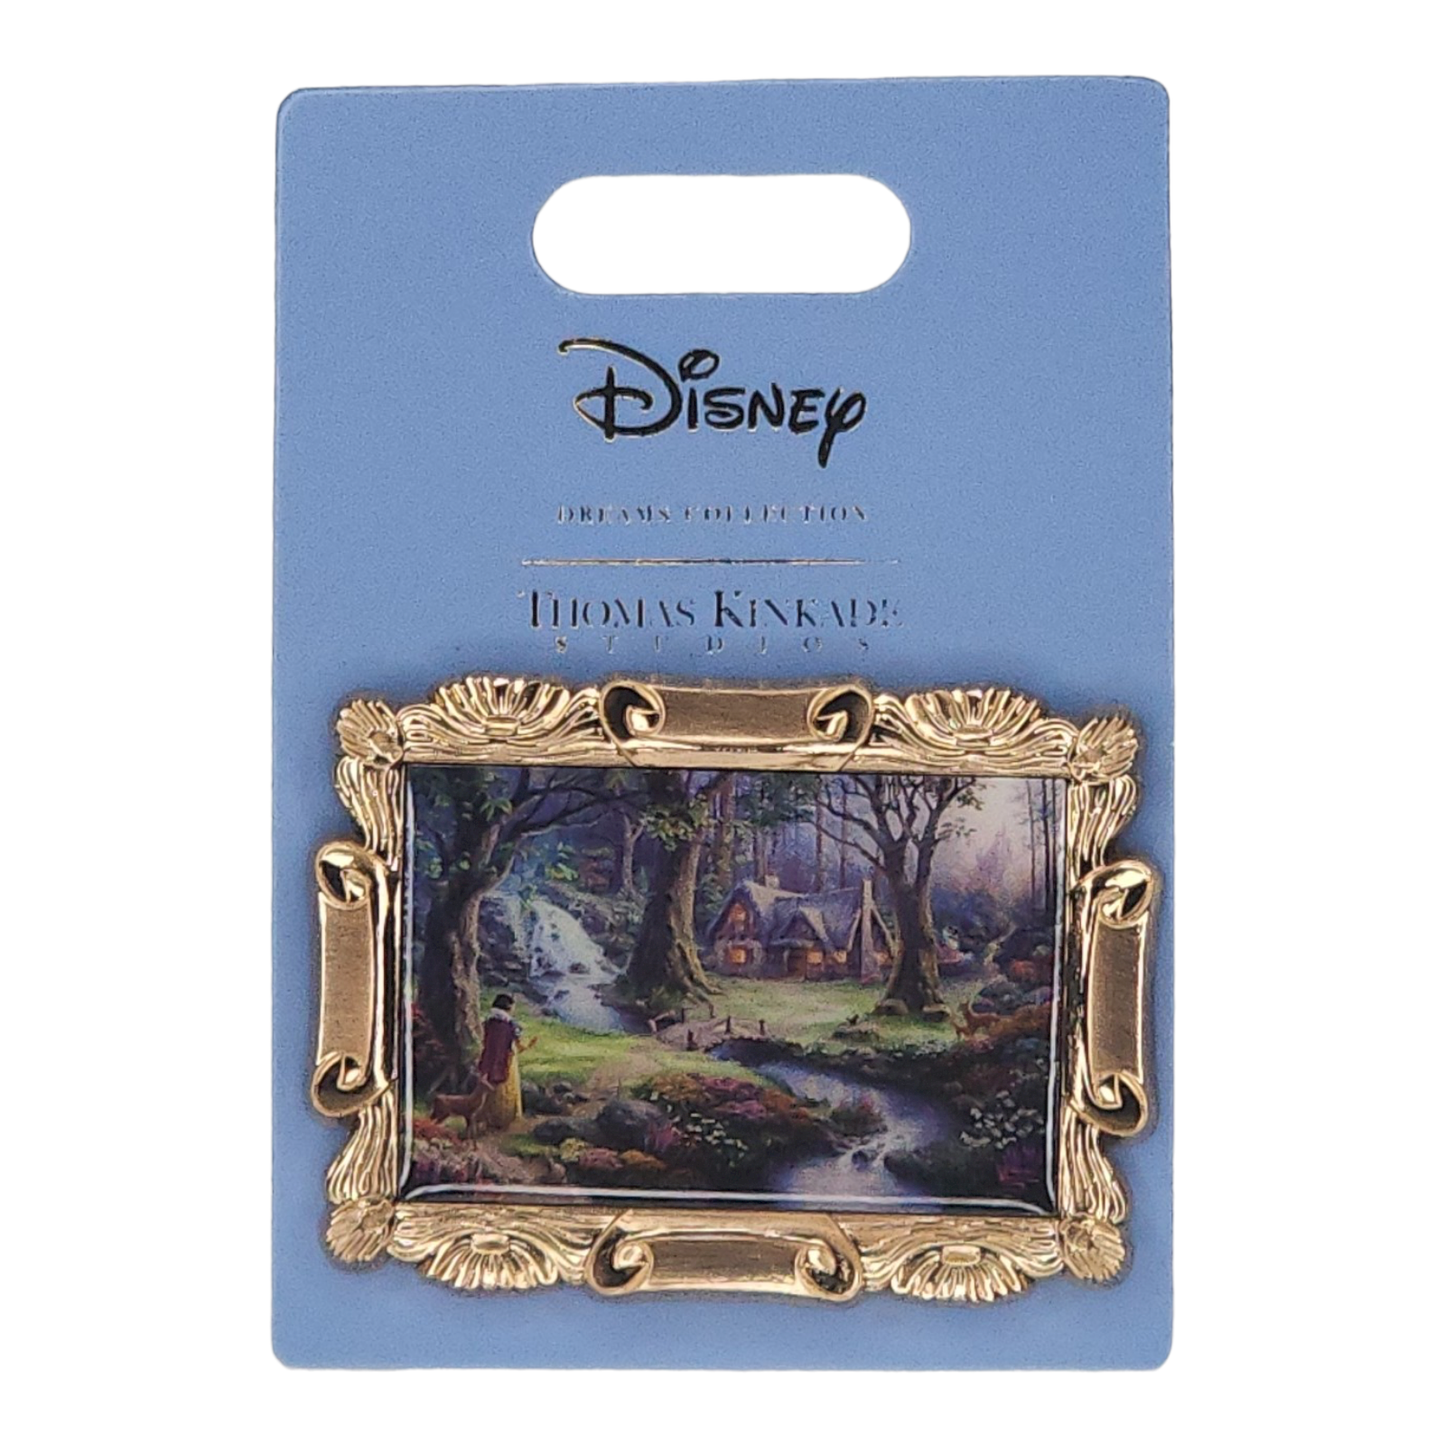 D23 Exclusive Snow White Painting Pin - Dreams Collection - Thomas Kinkade Studios - Limited Edition 900